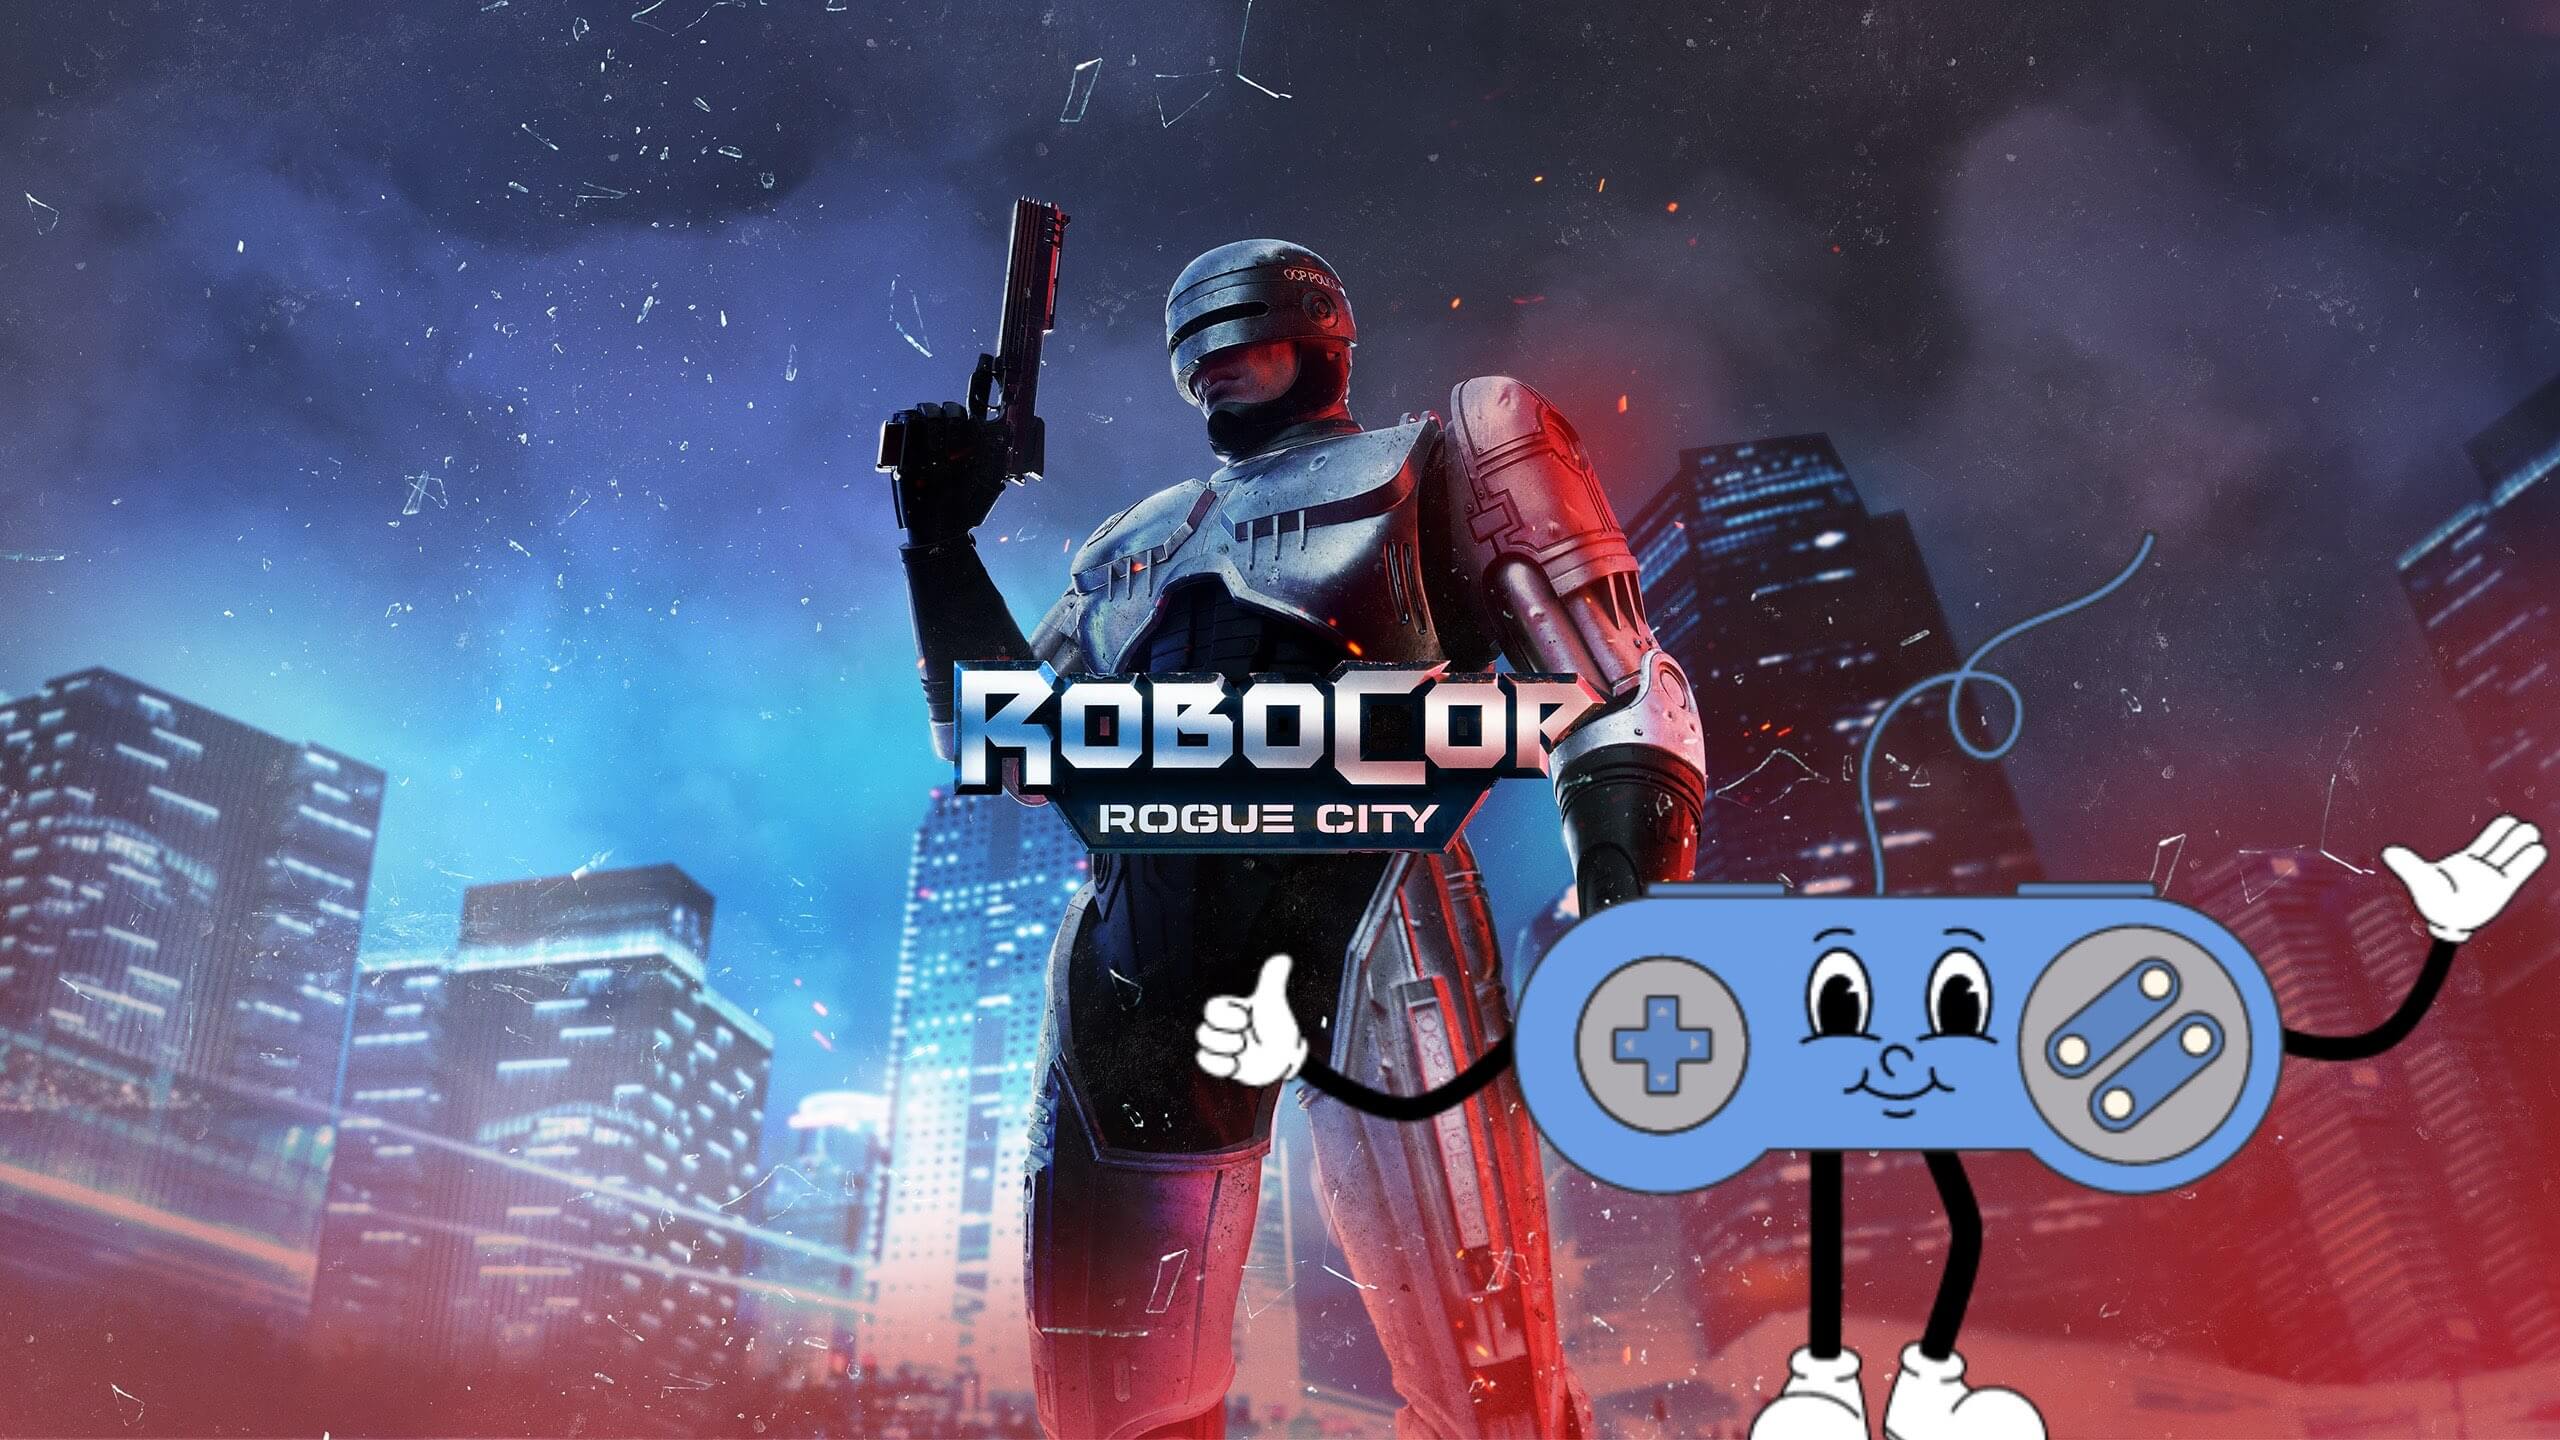 Cover art for the game showing robocop standing centered with buildings in the background, he is holding a gun. Paddy the thumb culture mascot, a blue controller with a happy face is giving the game a thumbs up.